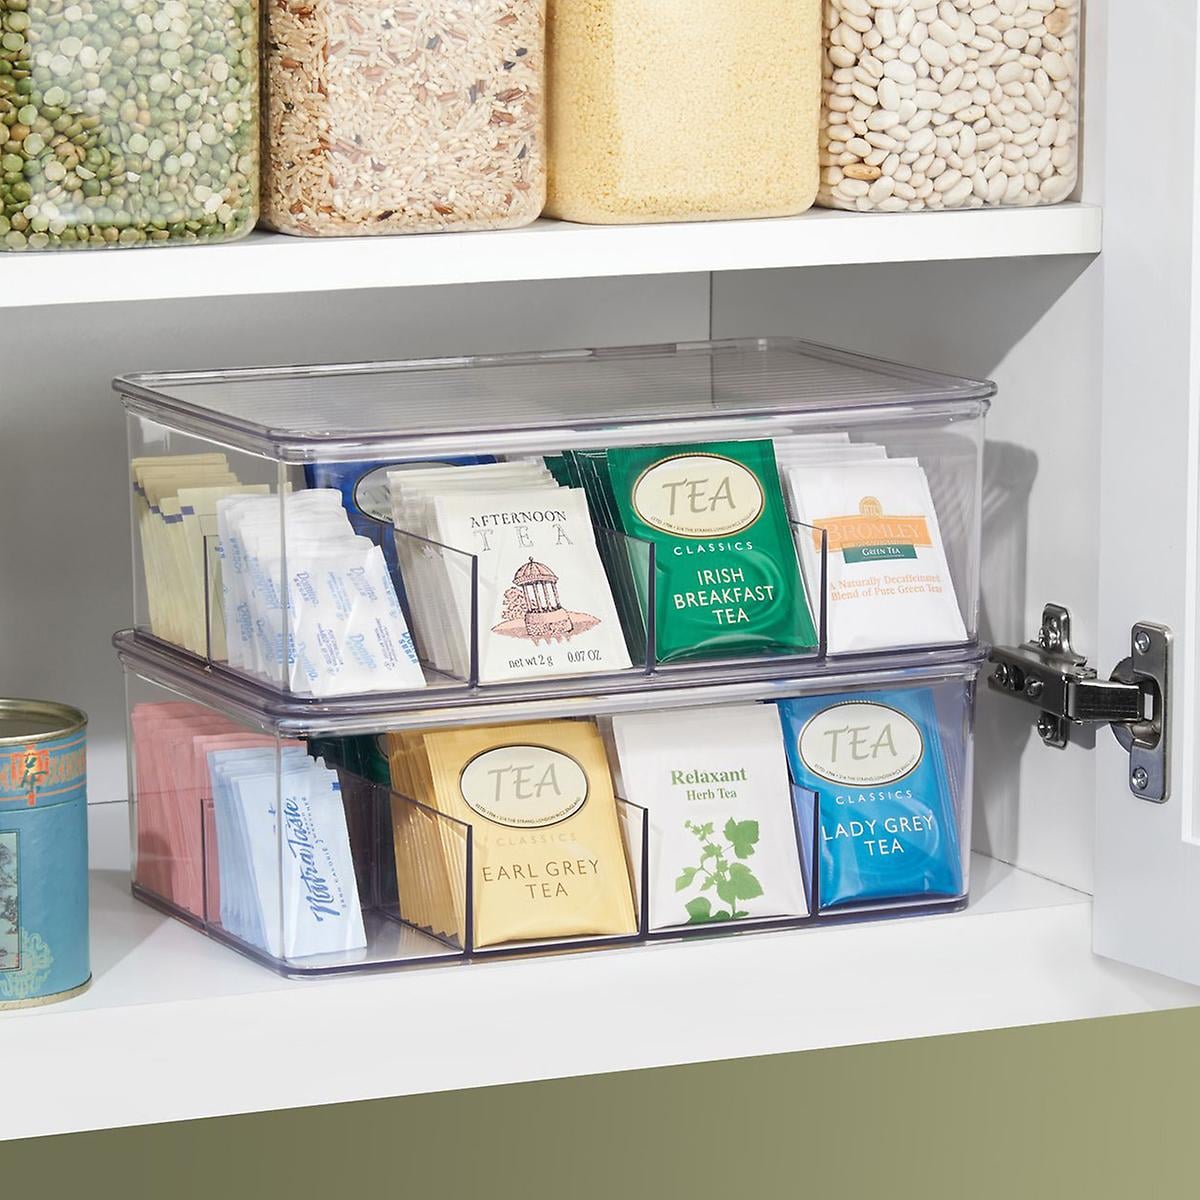 We Found Deals on Food Storage and Organization Products That Will  Declutter Your Kitchen—Save Up to 60% Off